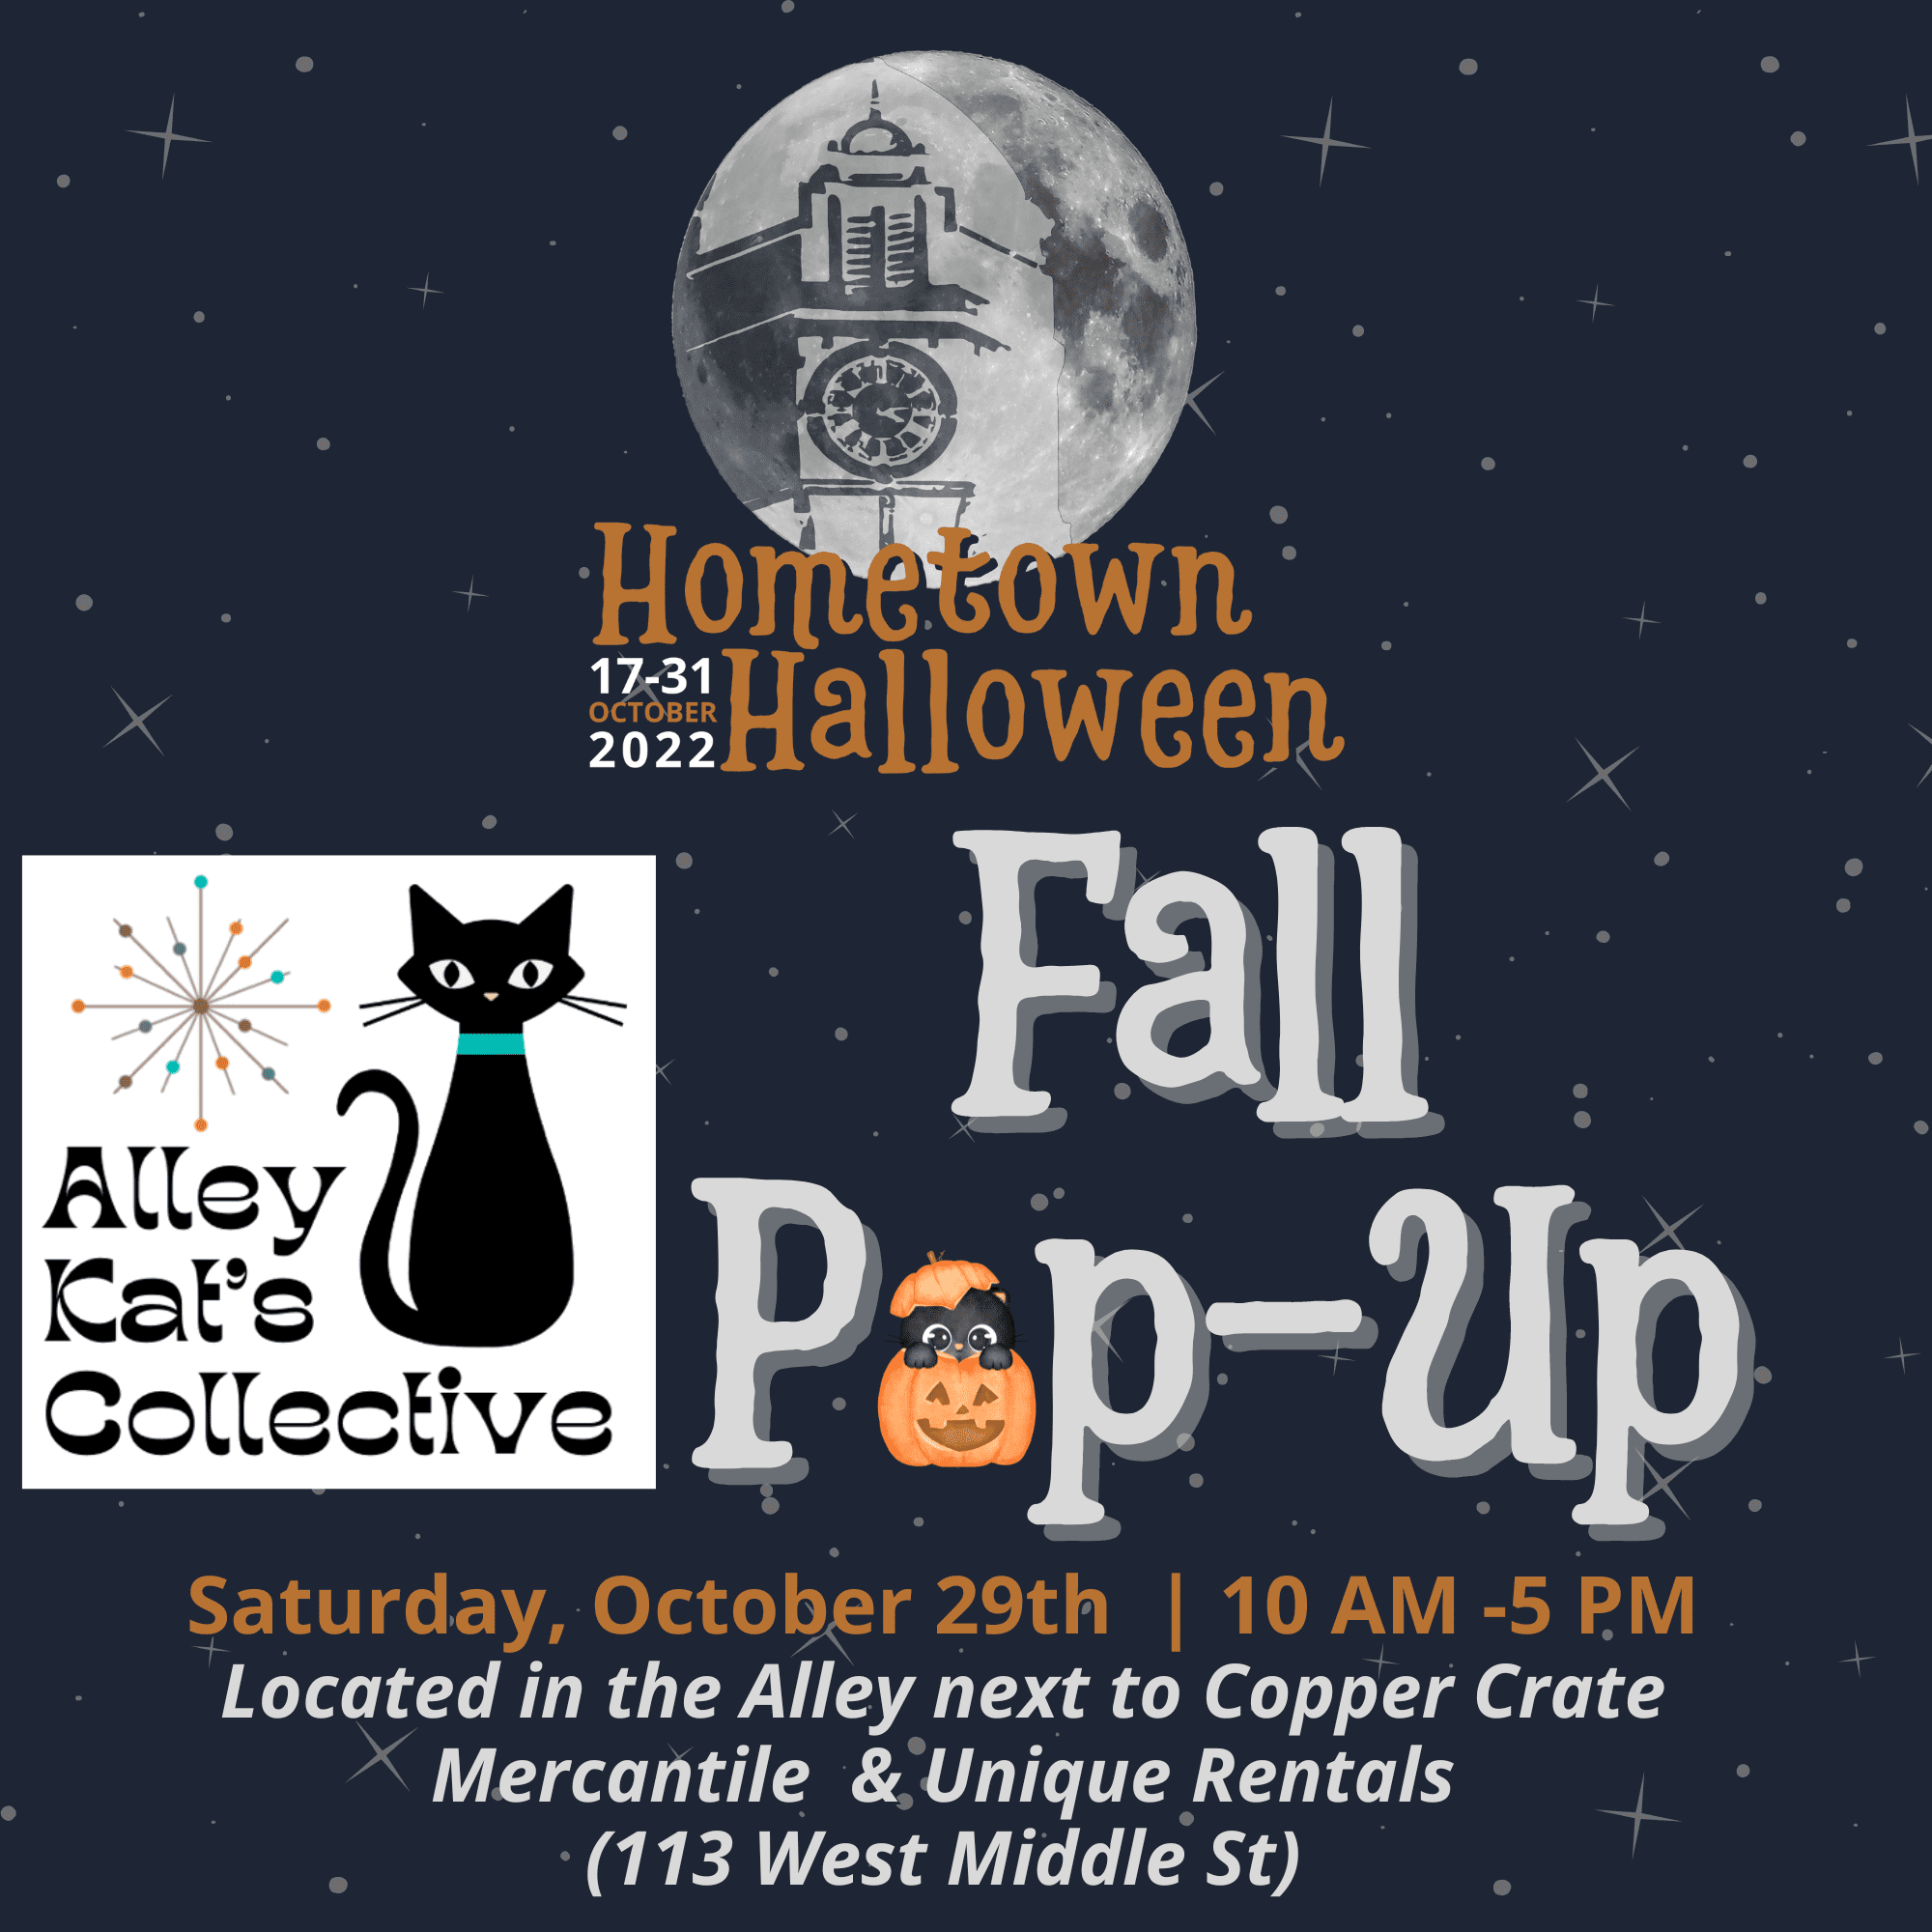 Alley Cat Collective Fall Pop Up